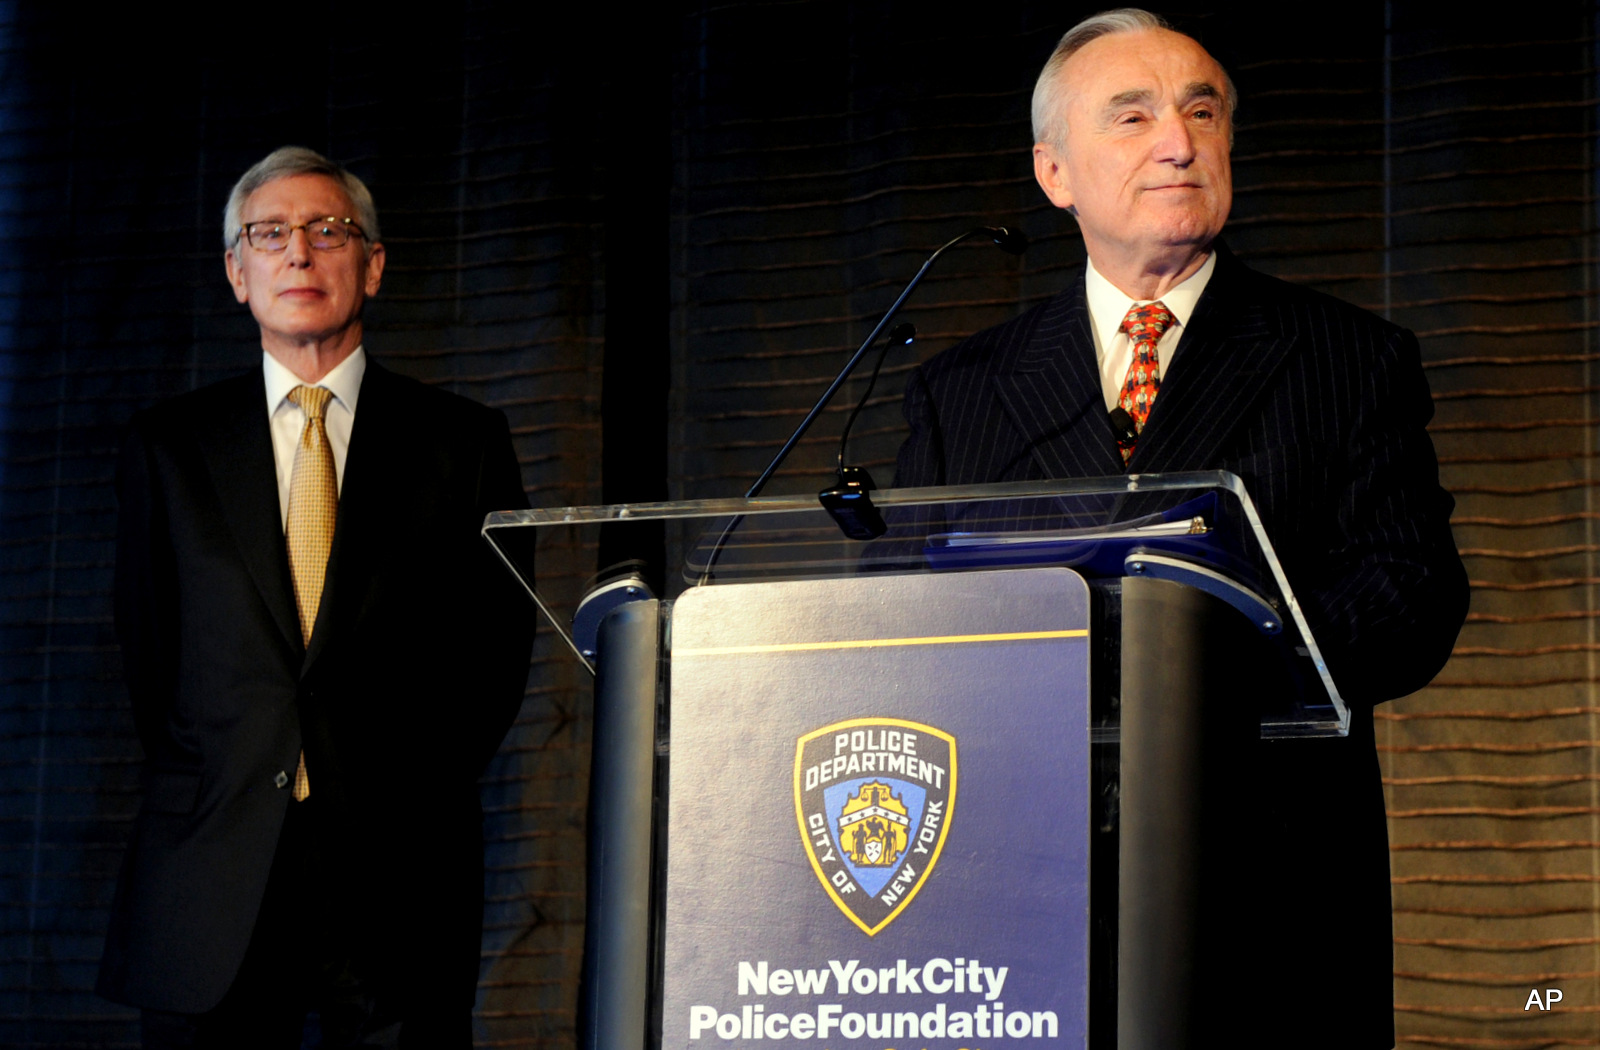 New York City Police Commissioner William J. Bratton, right, joined by H. Dale Hemmerdinger, Chairman of the Board, New York City Police Foundation, speaks at the Foundation's State of the NYPD breakfast in New York, Thursday, Jan. 29, 2015.